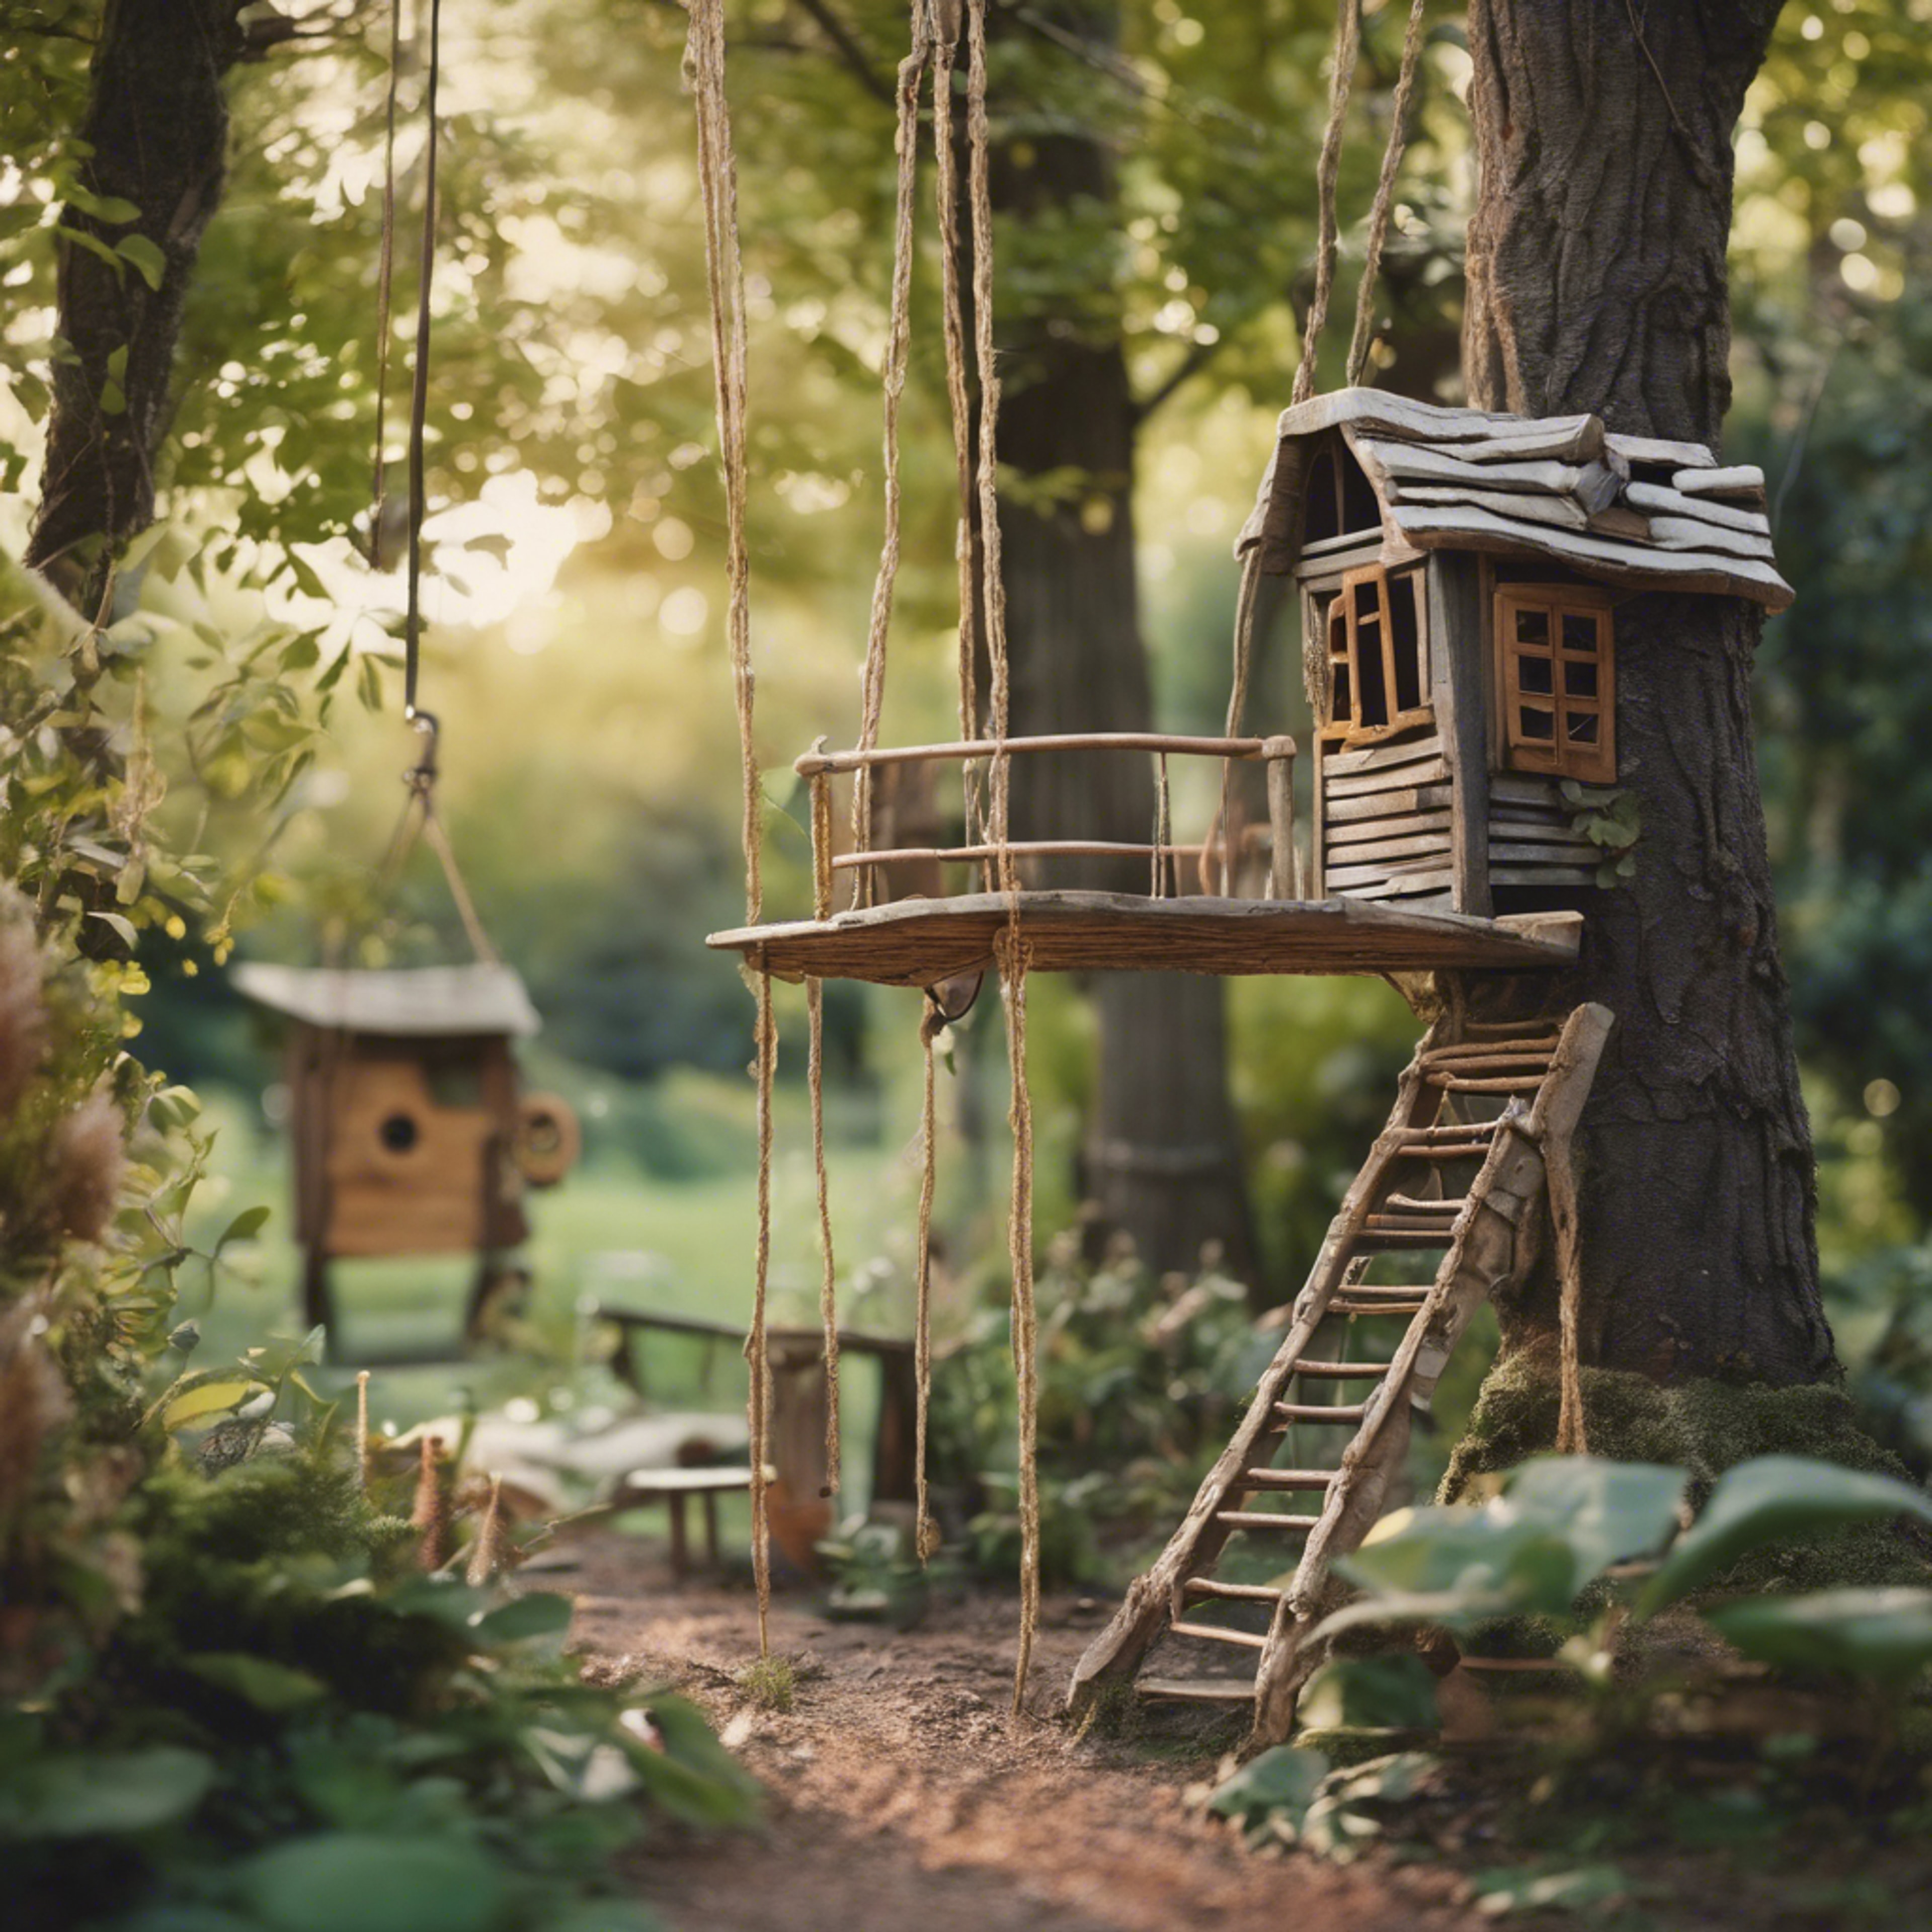 A nostalgic children’s garden filled with hidden treasures, tire swings, and treehouses built amidst towering trees. Taustakuva[4077f42451f34ca69b37]